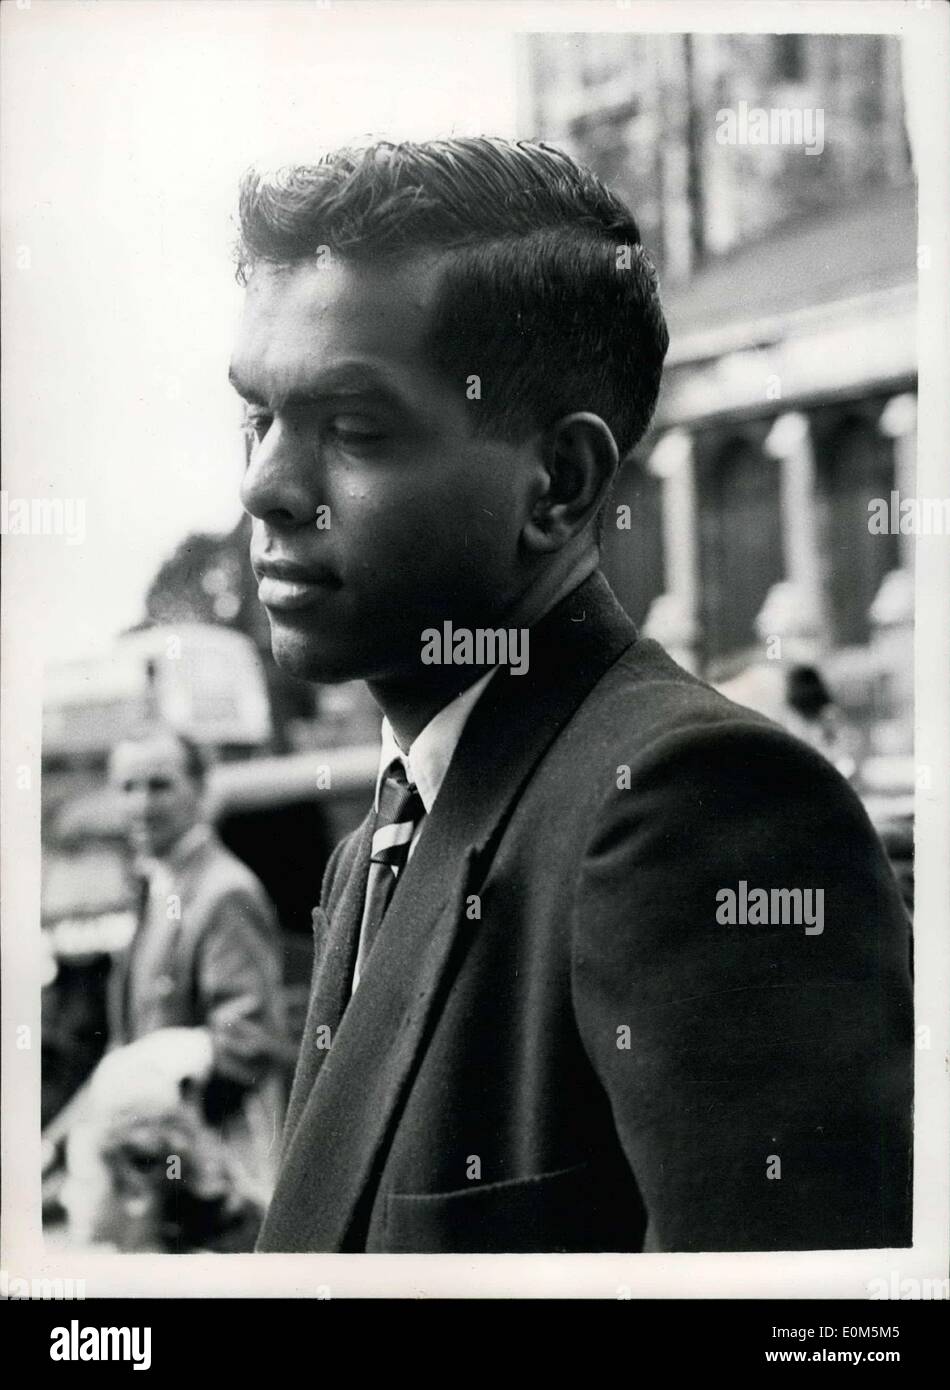 Jul. 14, 1953 - Son of Indian Rajah on forged cheque charge, his family worth ''millions'; Twenty one year old Muthiah Ramaswamy - son of a Millionaire Indian Rajah appeared at the Old Bailey yesterday - pleeding ''Not Guilty'' to charges of obtaining shoes and suits with forged cheques taken from his best friend's cheque book. So wealthy was his family the Judge was told that he could have ''almost unlimited money for the asking''. He had 50,000 in shares worth about 5,000 a year Stock Photo